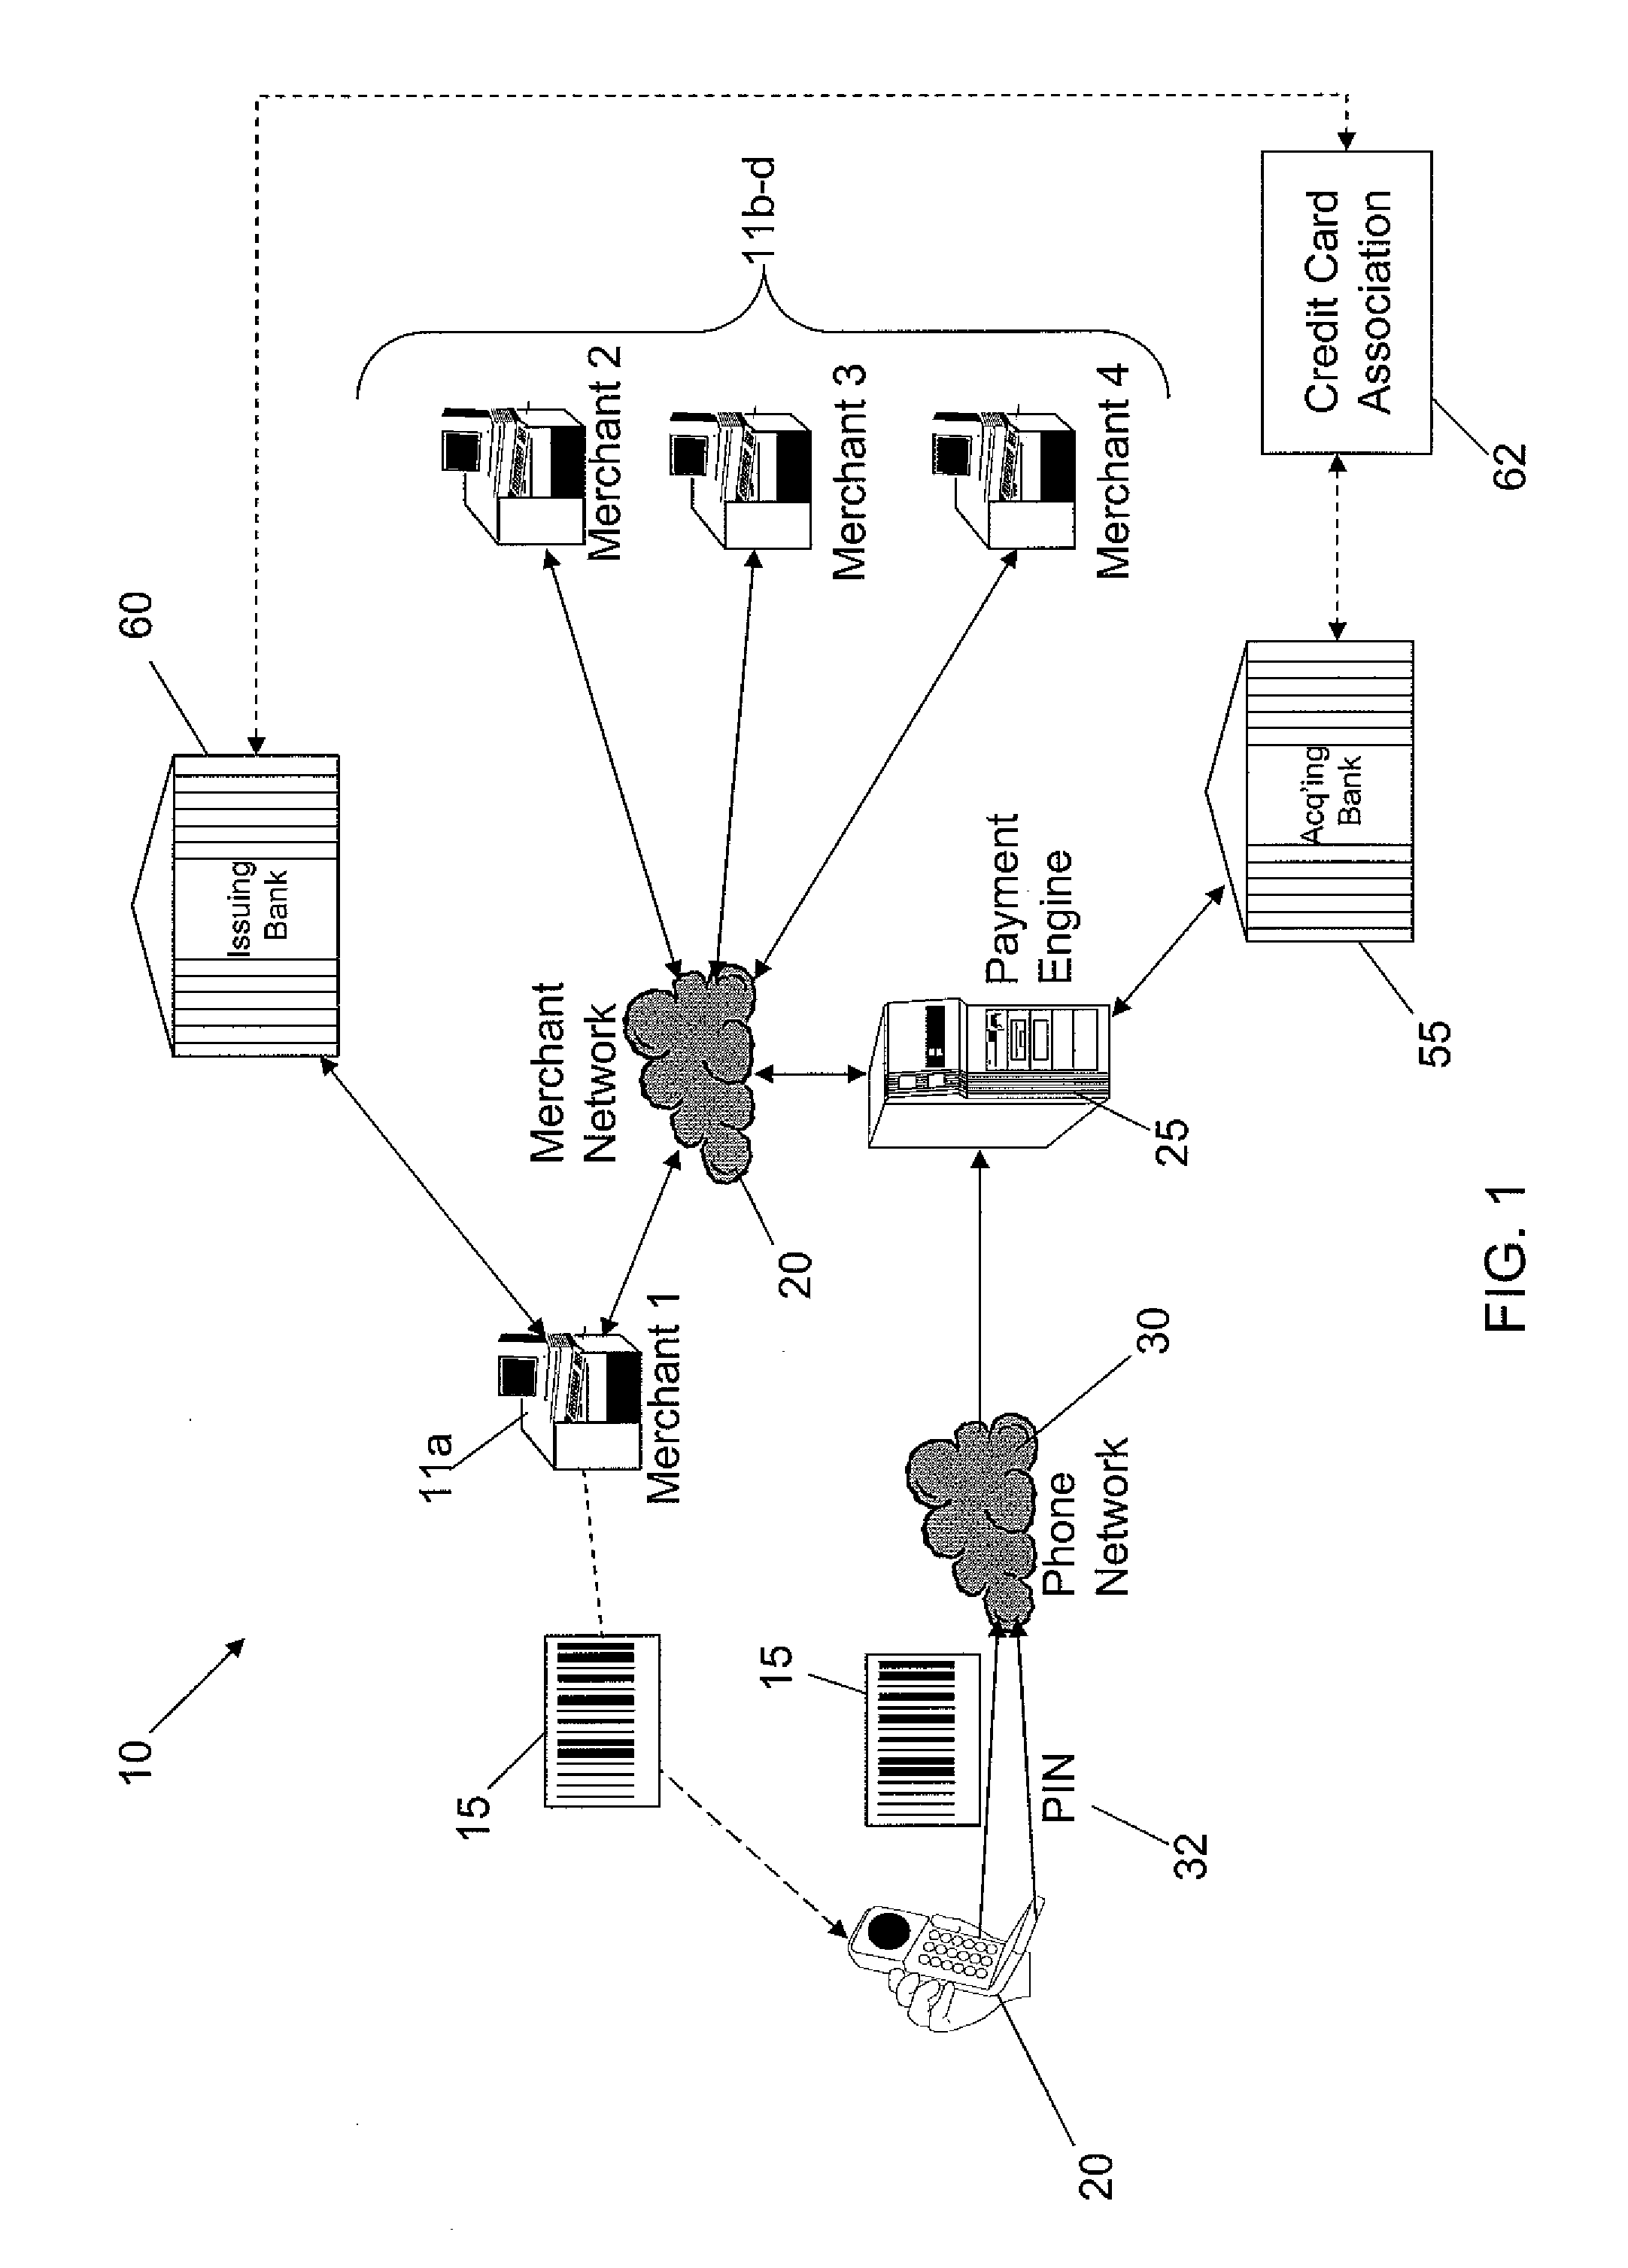 Distributed Payment System and Method